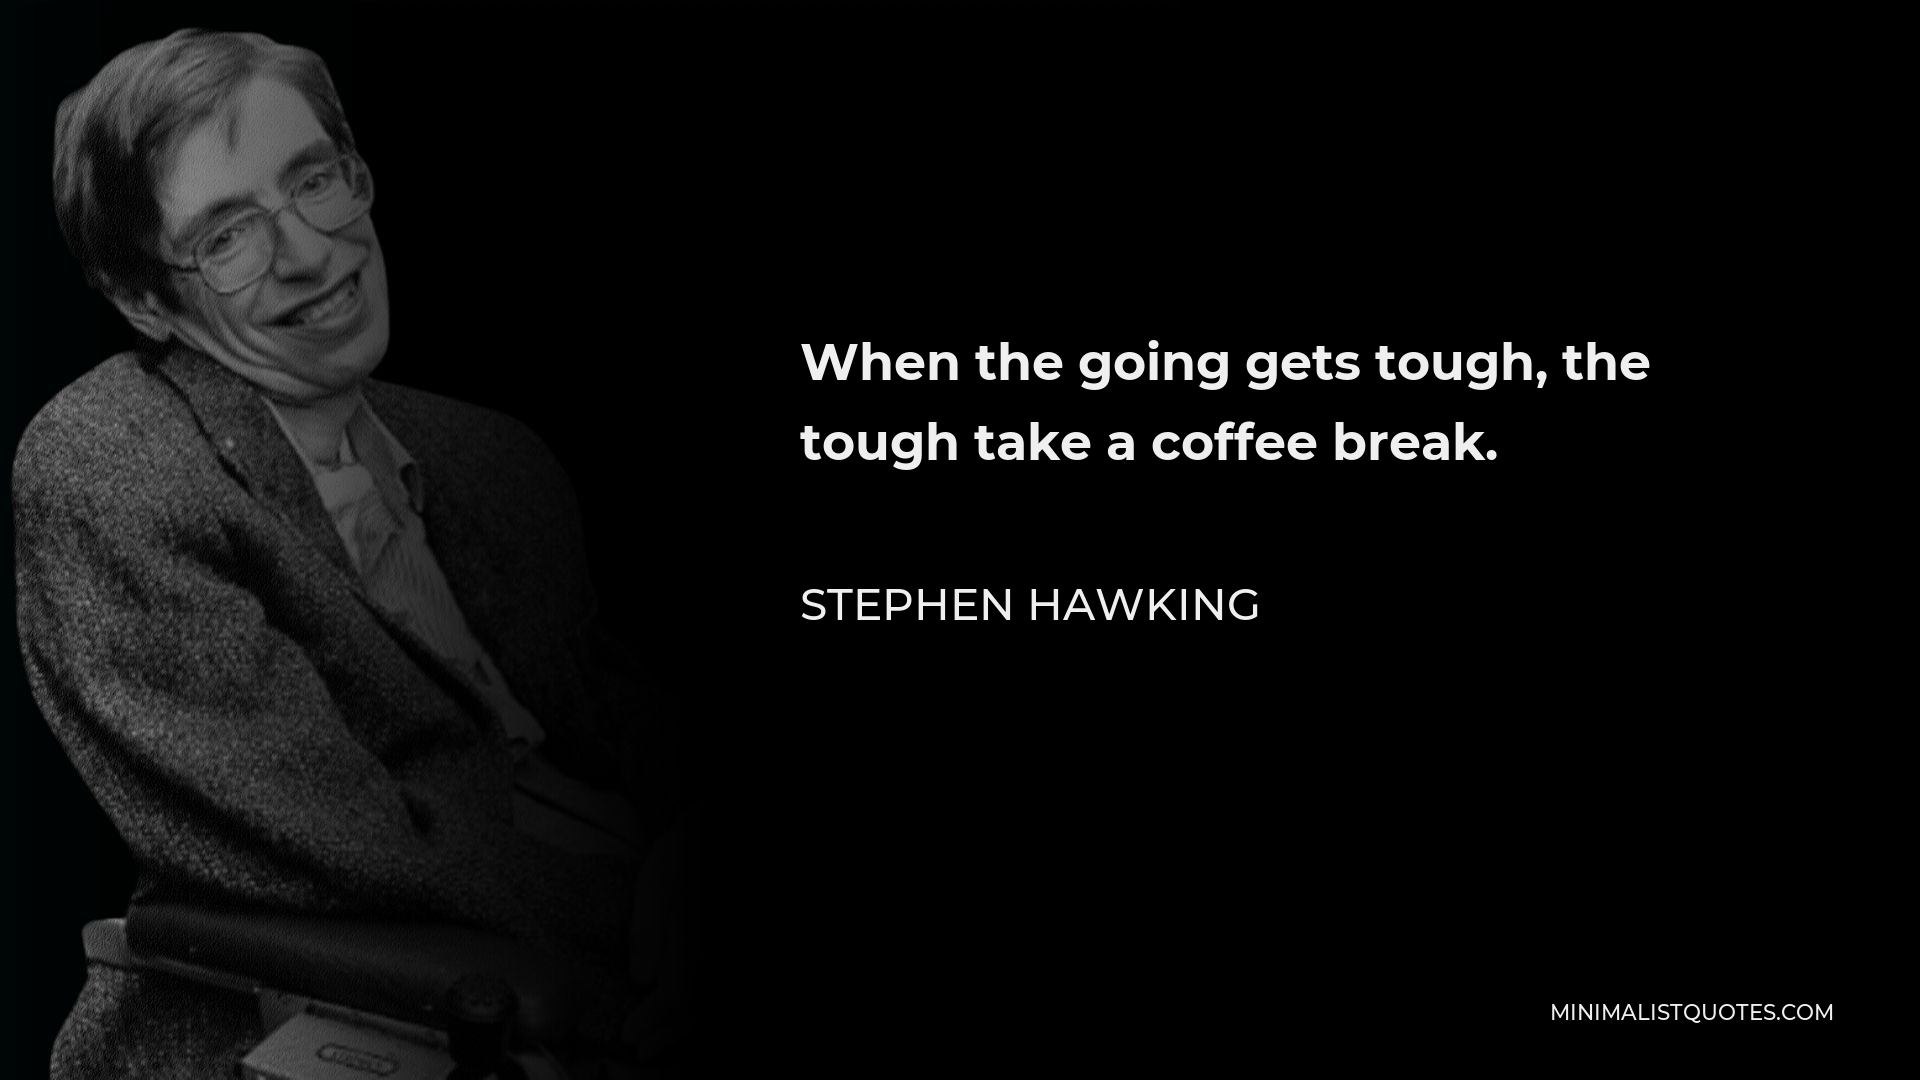 Stephen Hawking Quote - When the going gets tough, the tough take a coffee break.